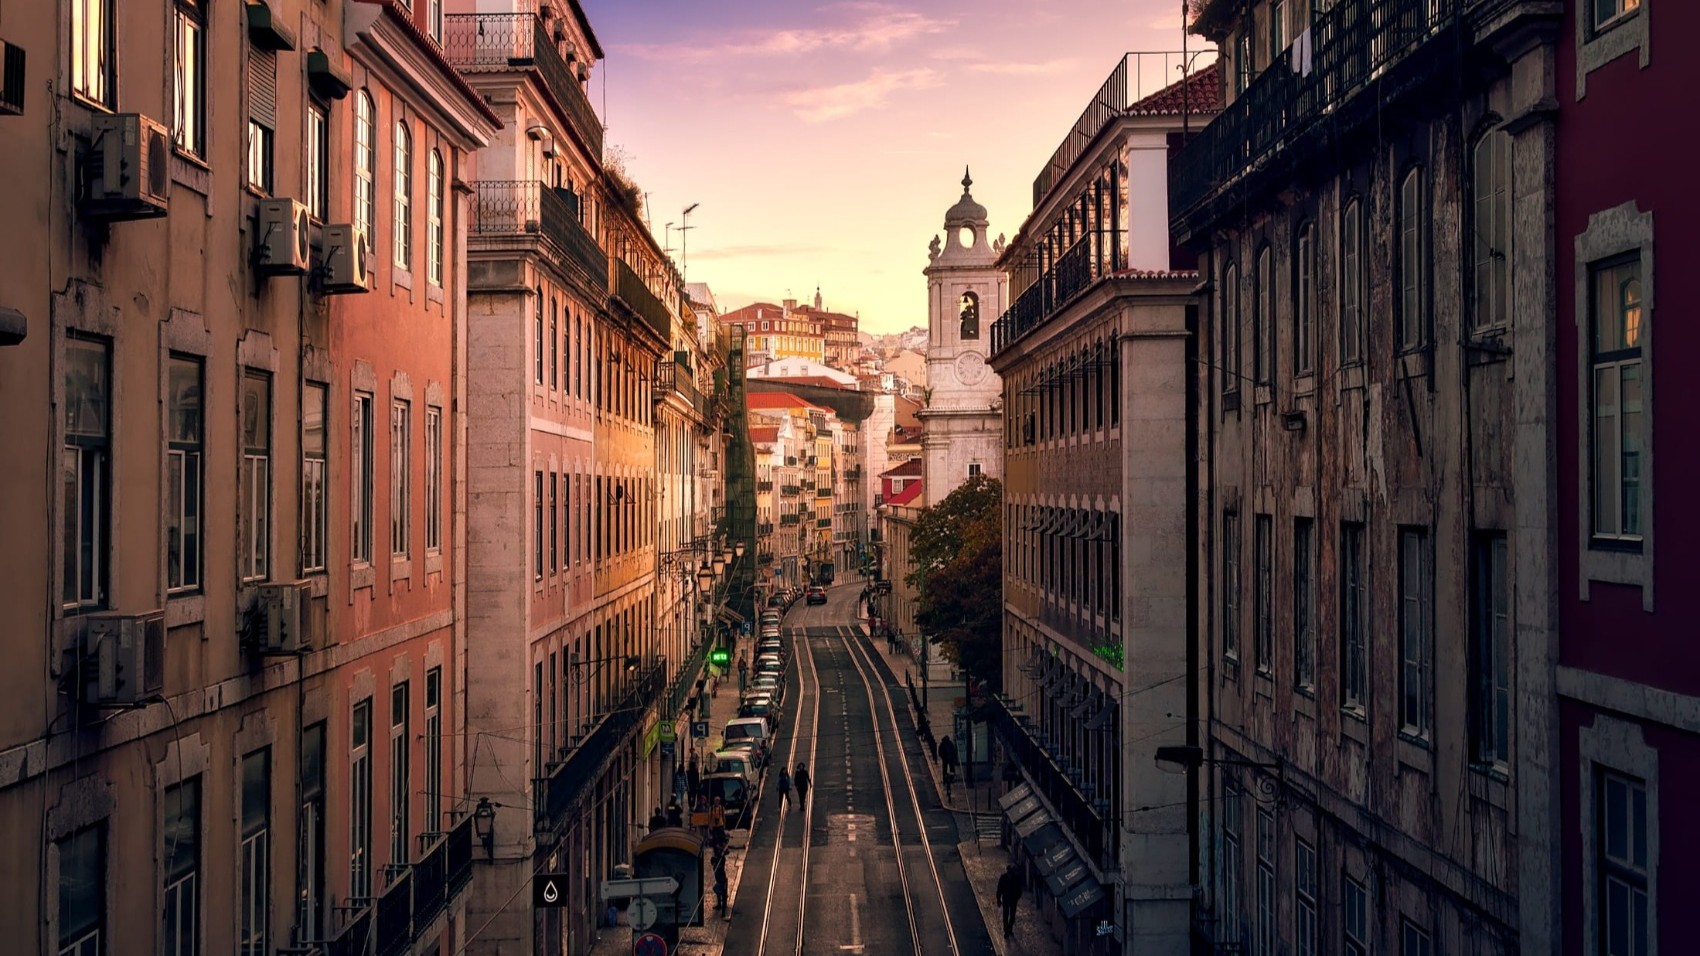 Lisbon-&-Surroundings-with-Alentejo-World-Heritage-downtown-streets